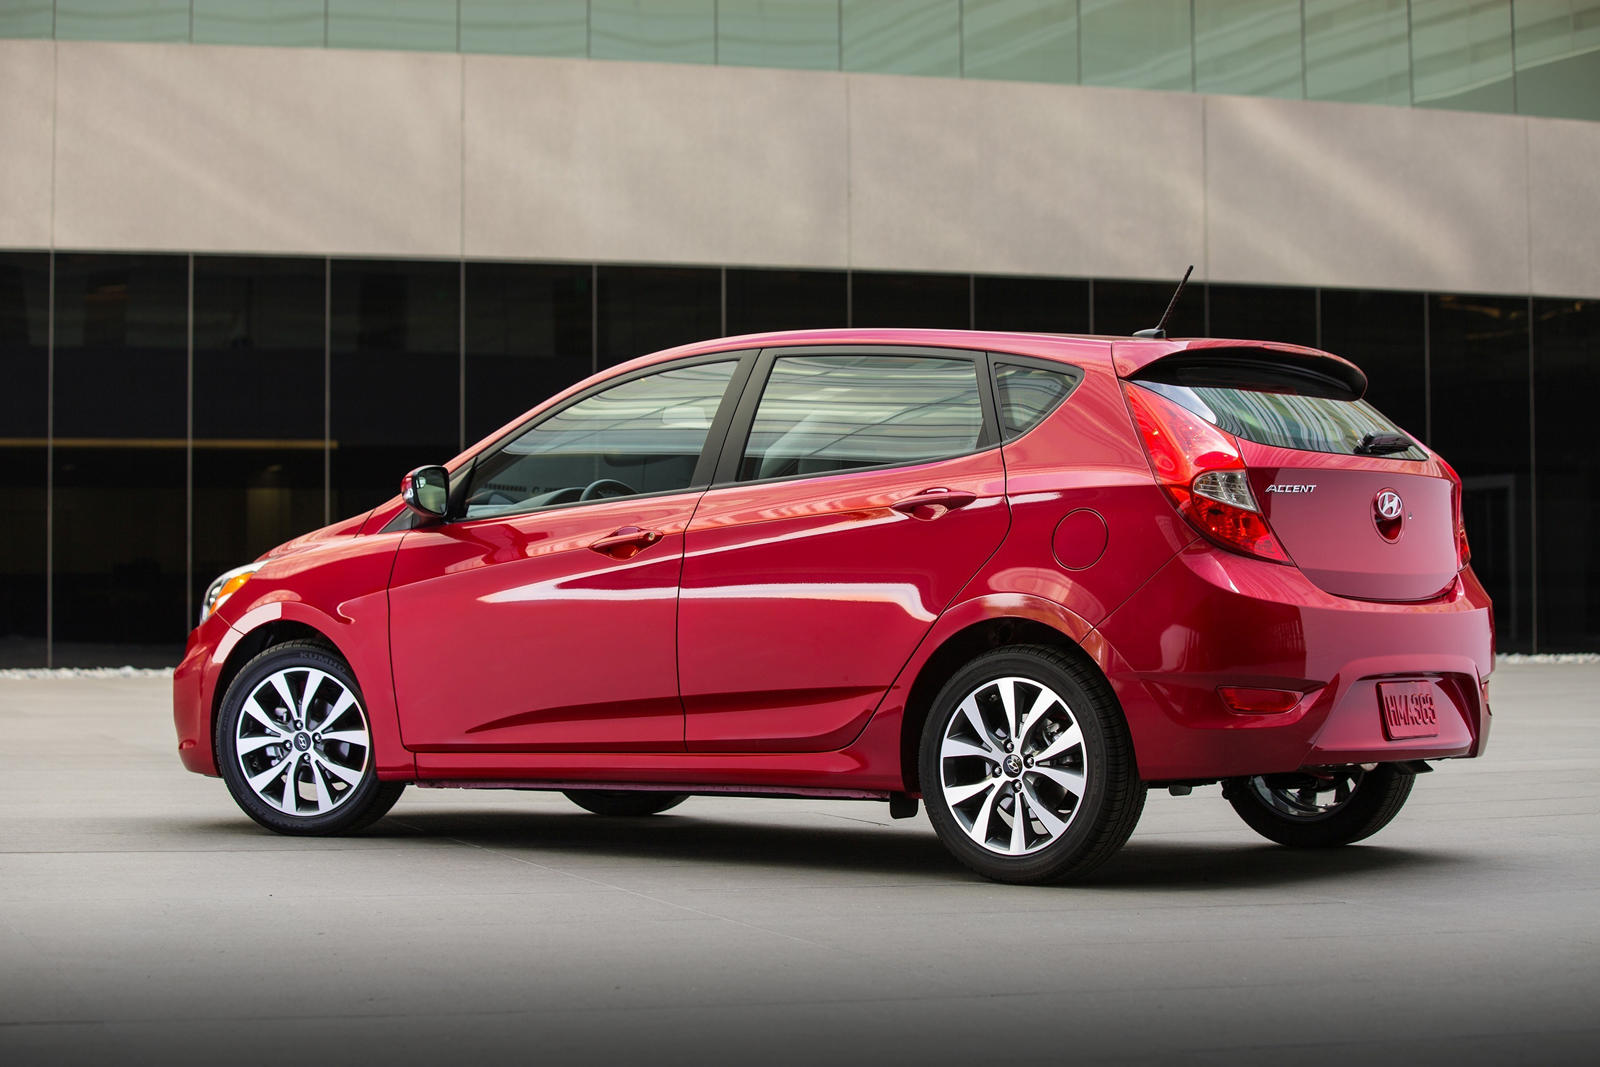 2017 Hyundai Accent Hatchback: Review, Trims, Specs, Price, New ...